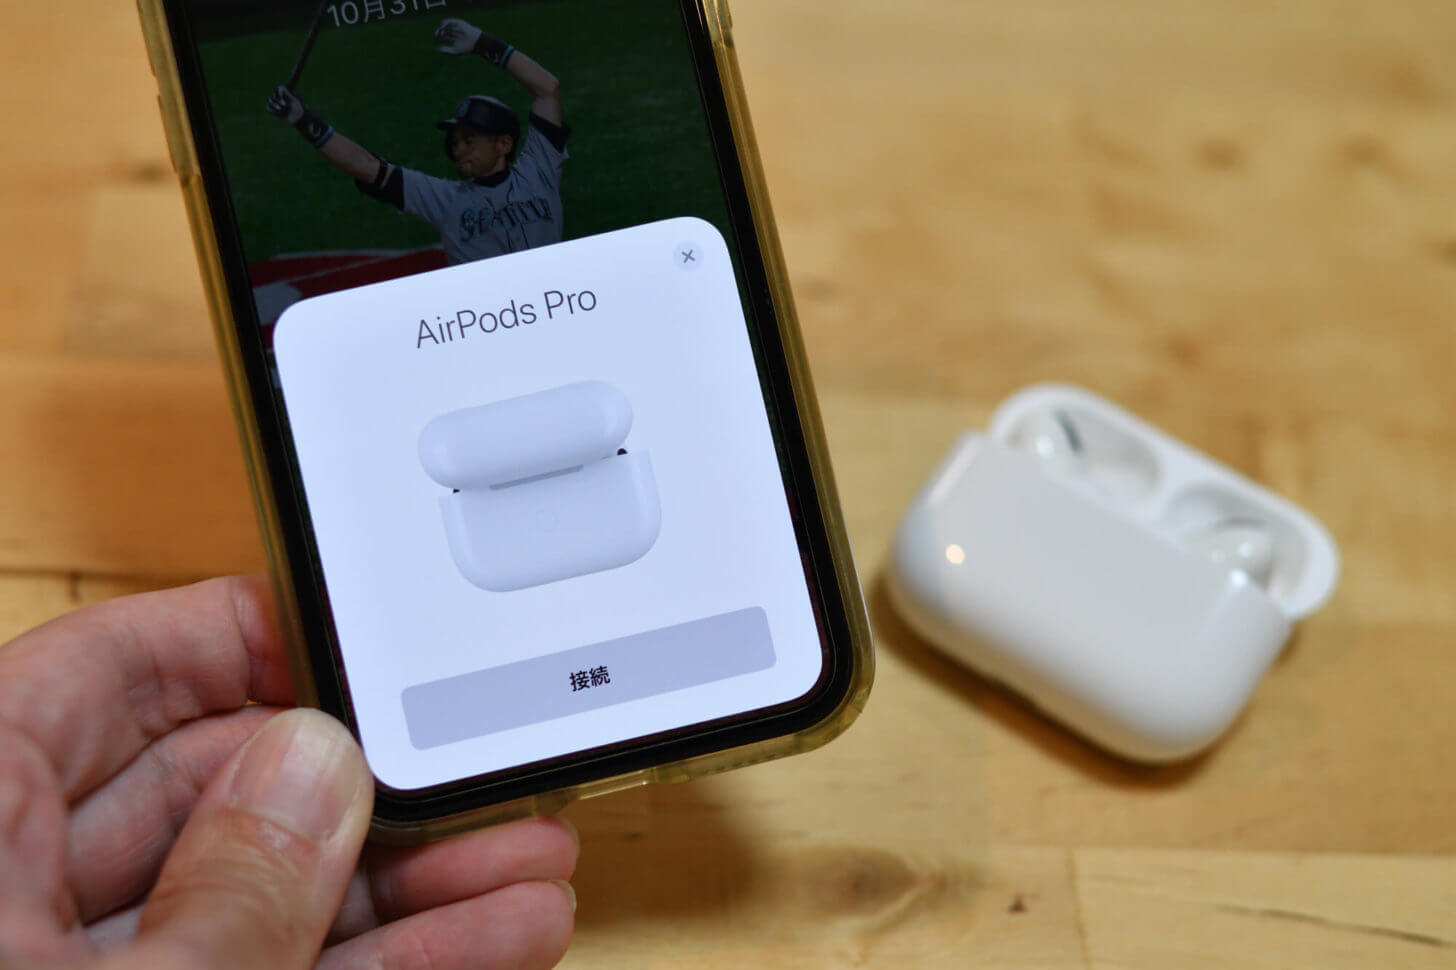 AirPods ProをiPhoneに接続中